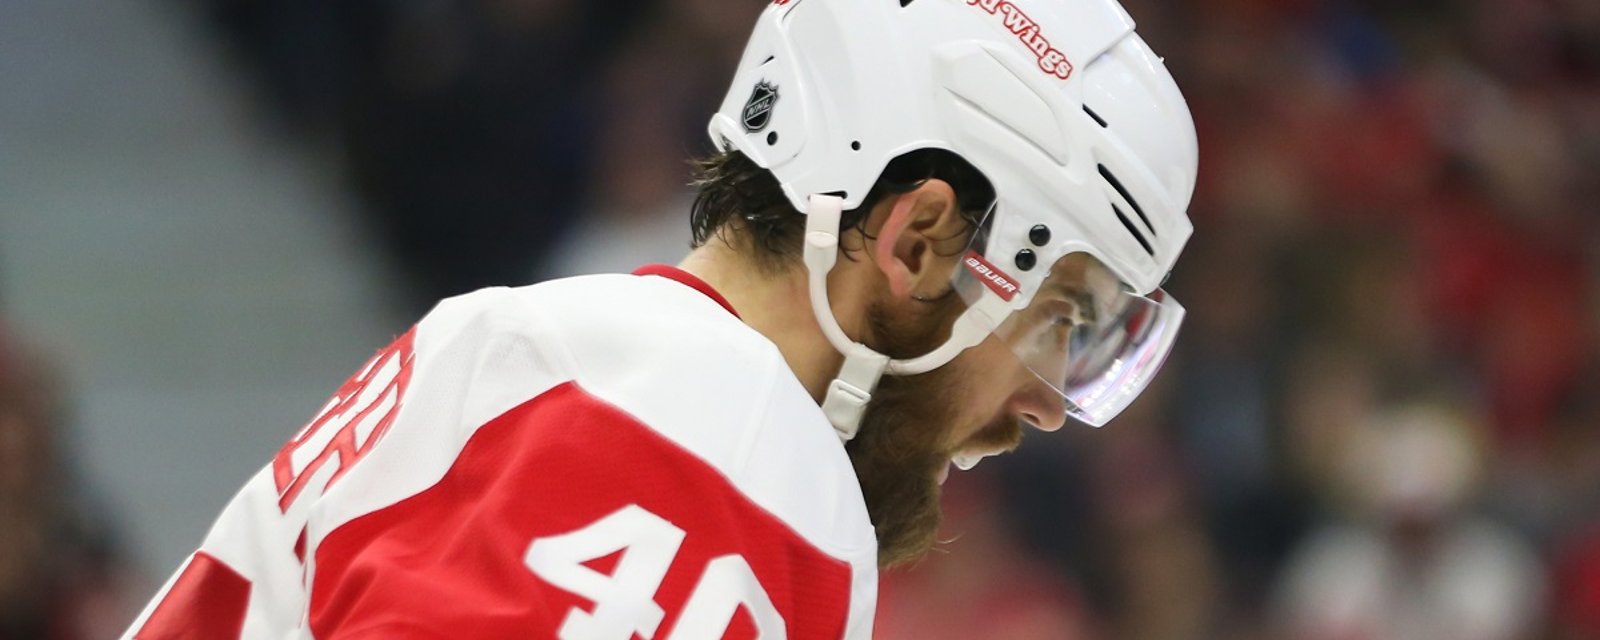 Henrik Zetterberg calls out his entire team after embarrassing 10 - 1 loss on Saturday.